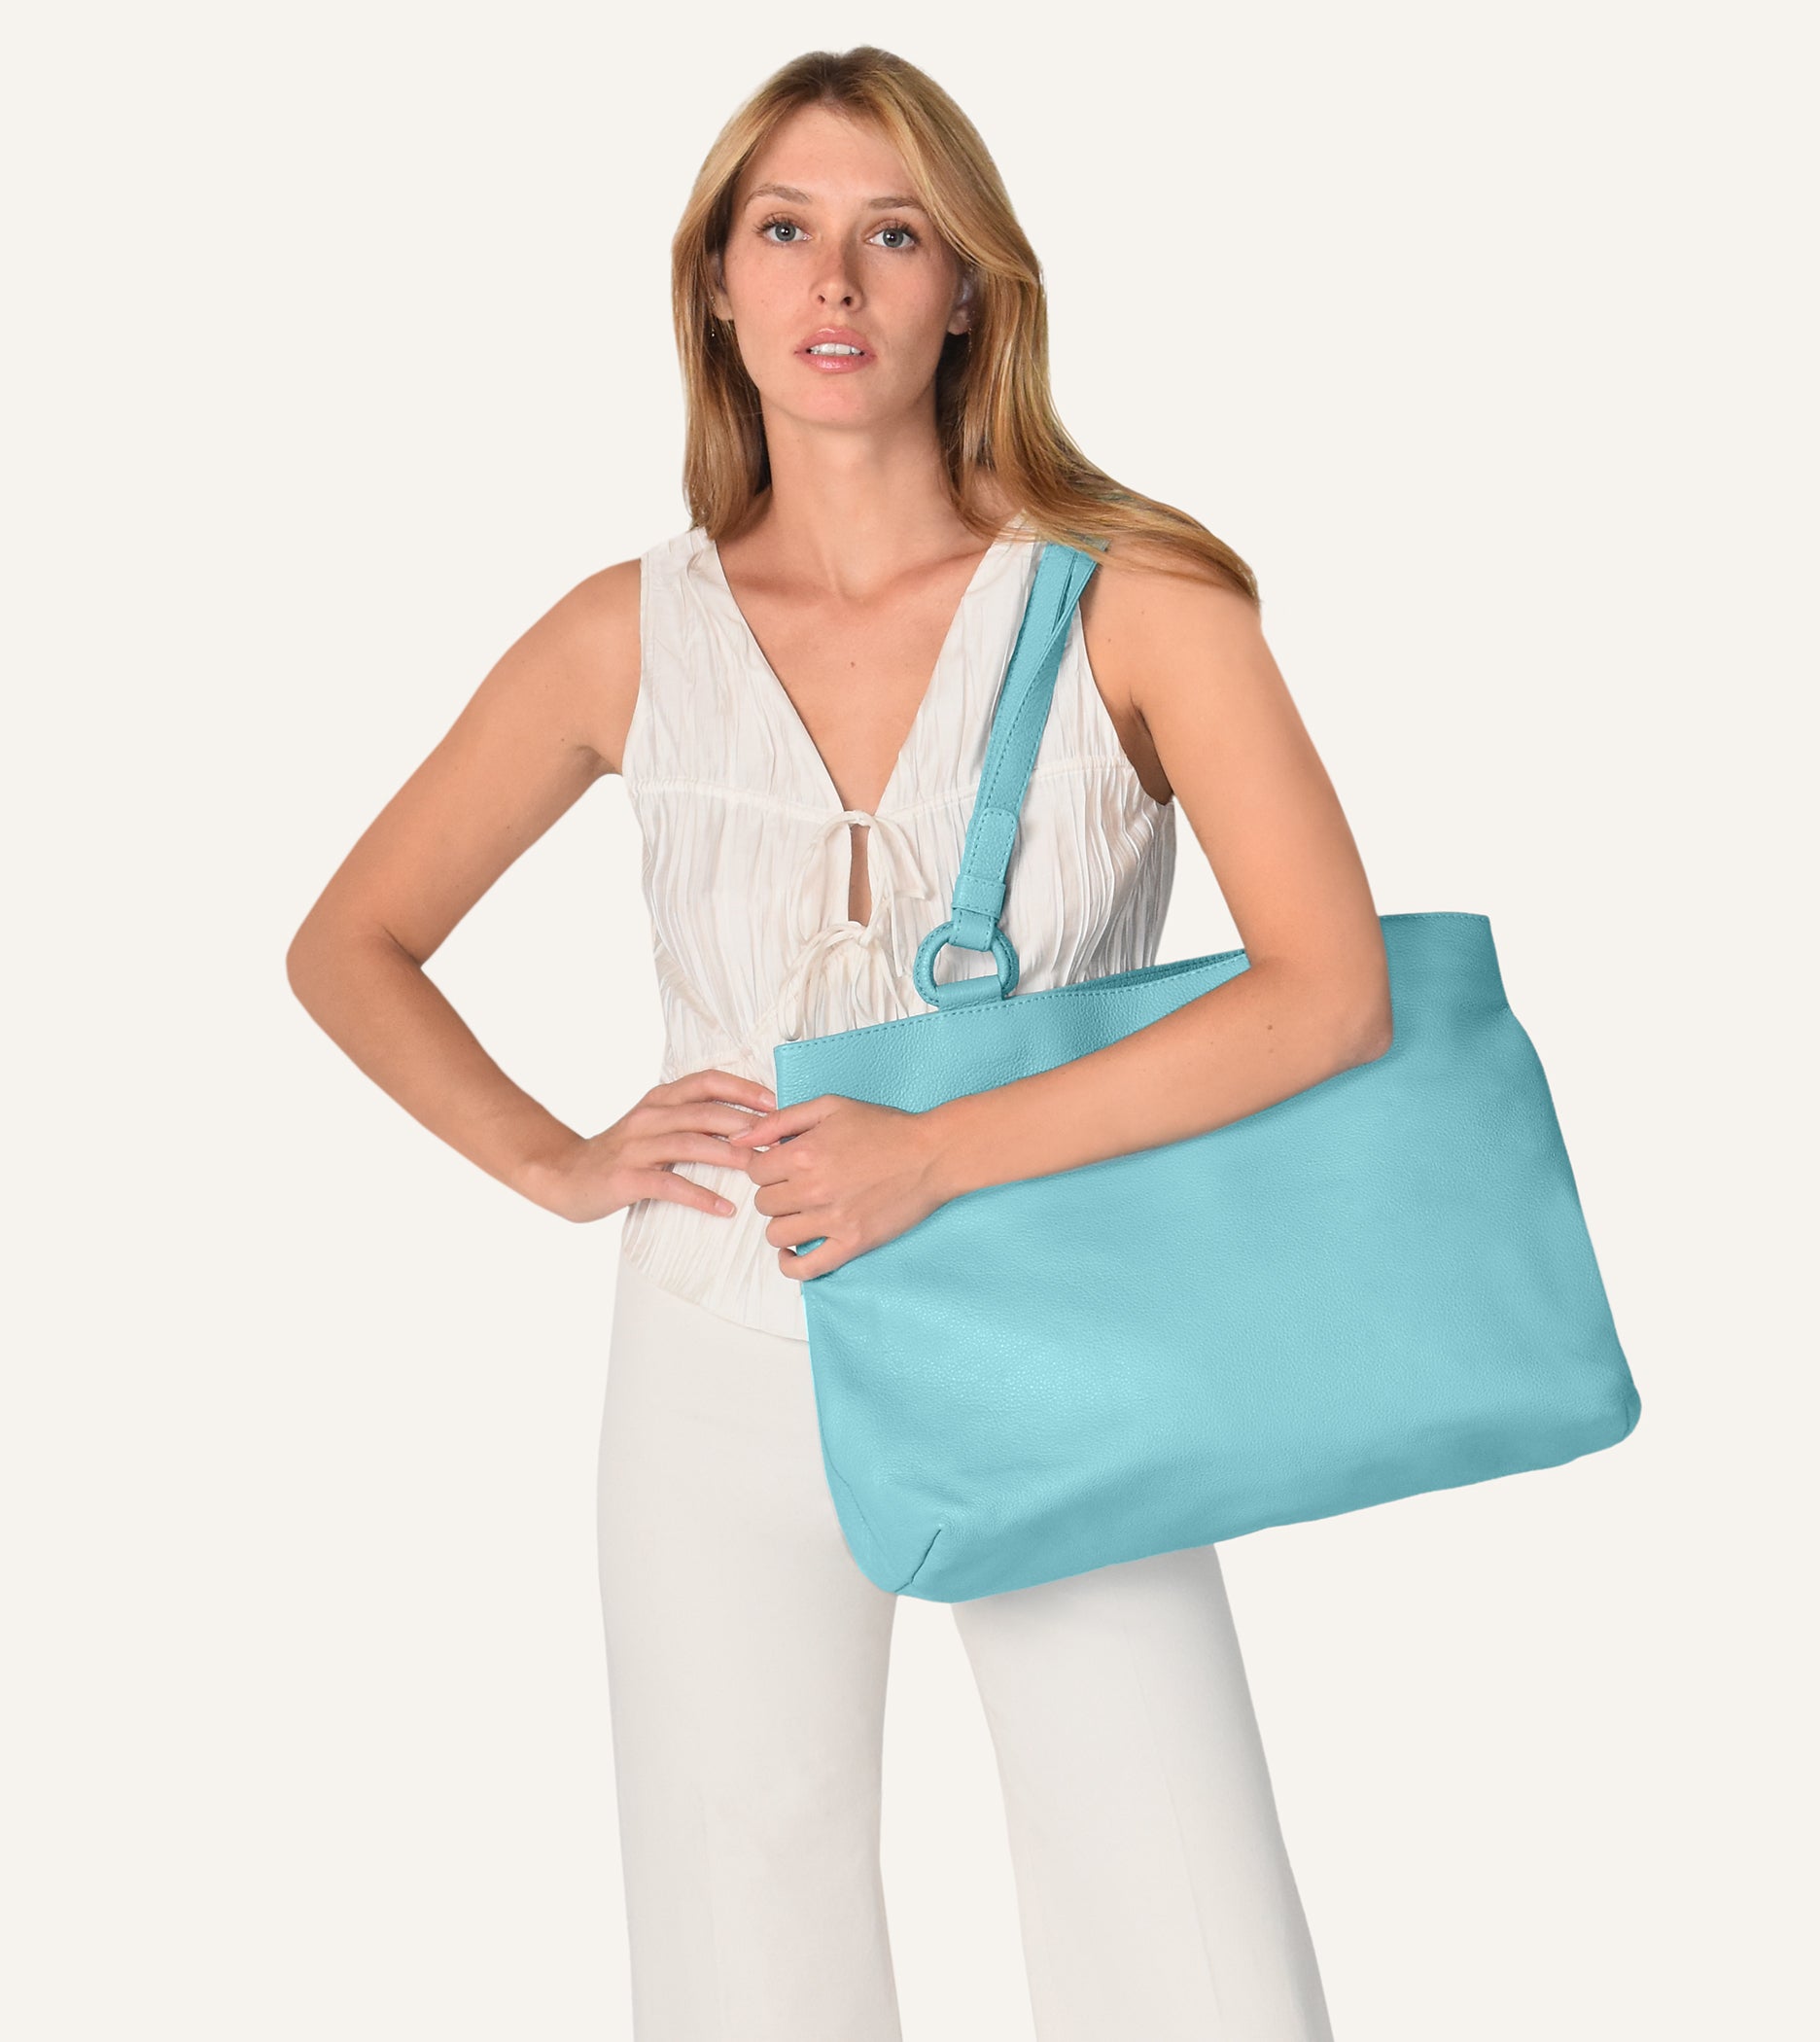 Marcella Leather Travel Tote in Azure